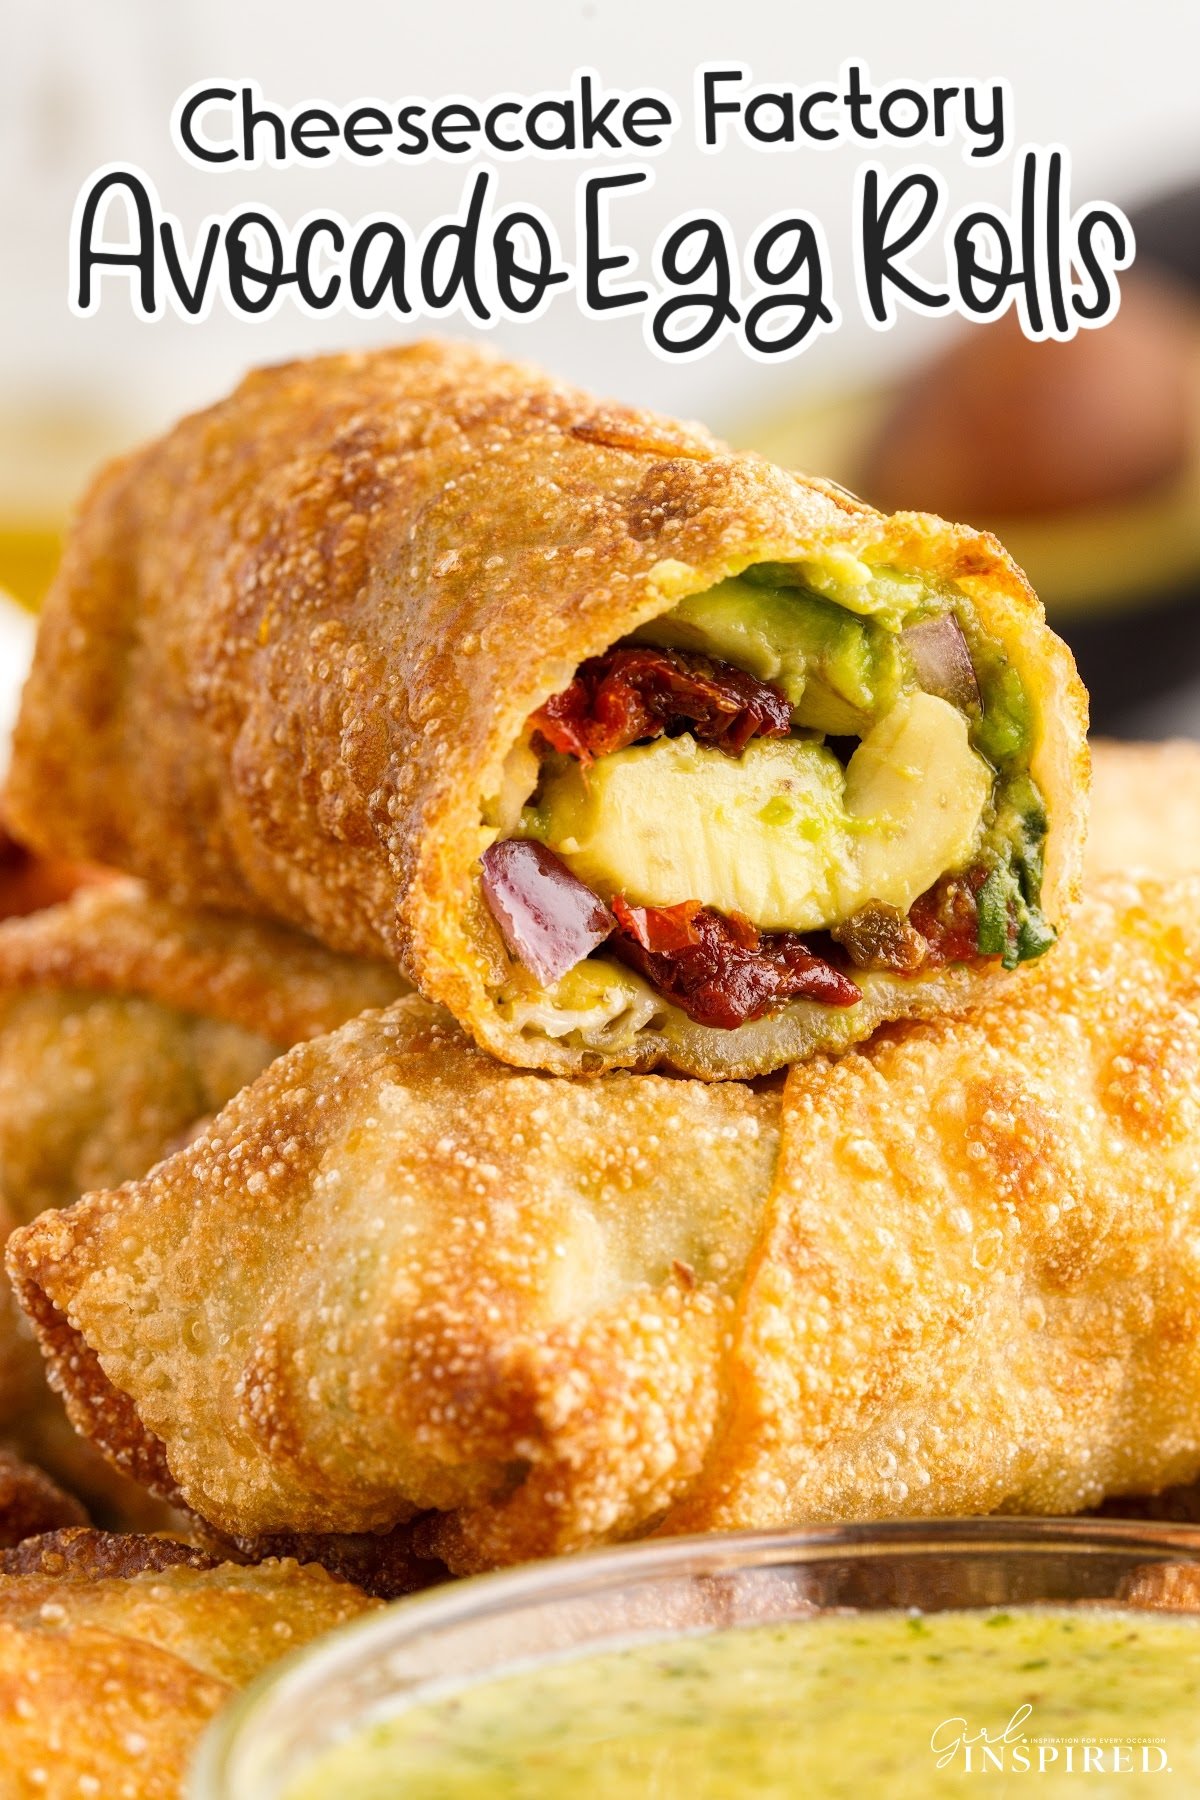 Cheesecake Factory Avocado Egg Rolls stacked on each other with text overlay.